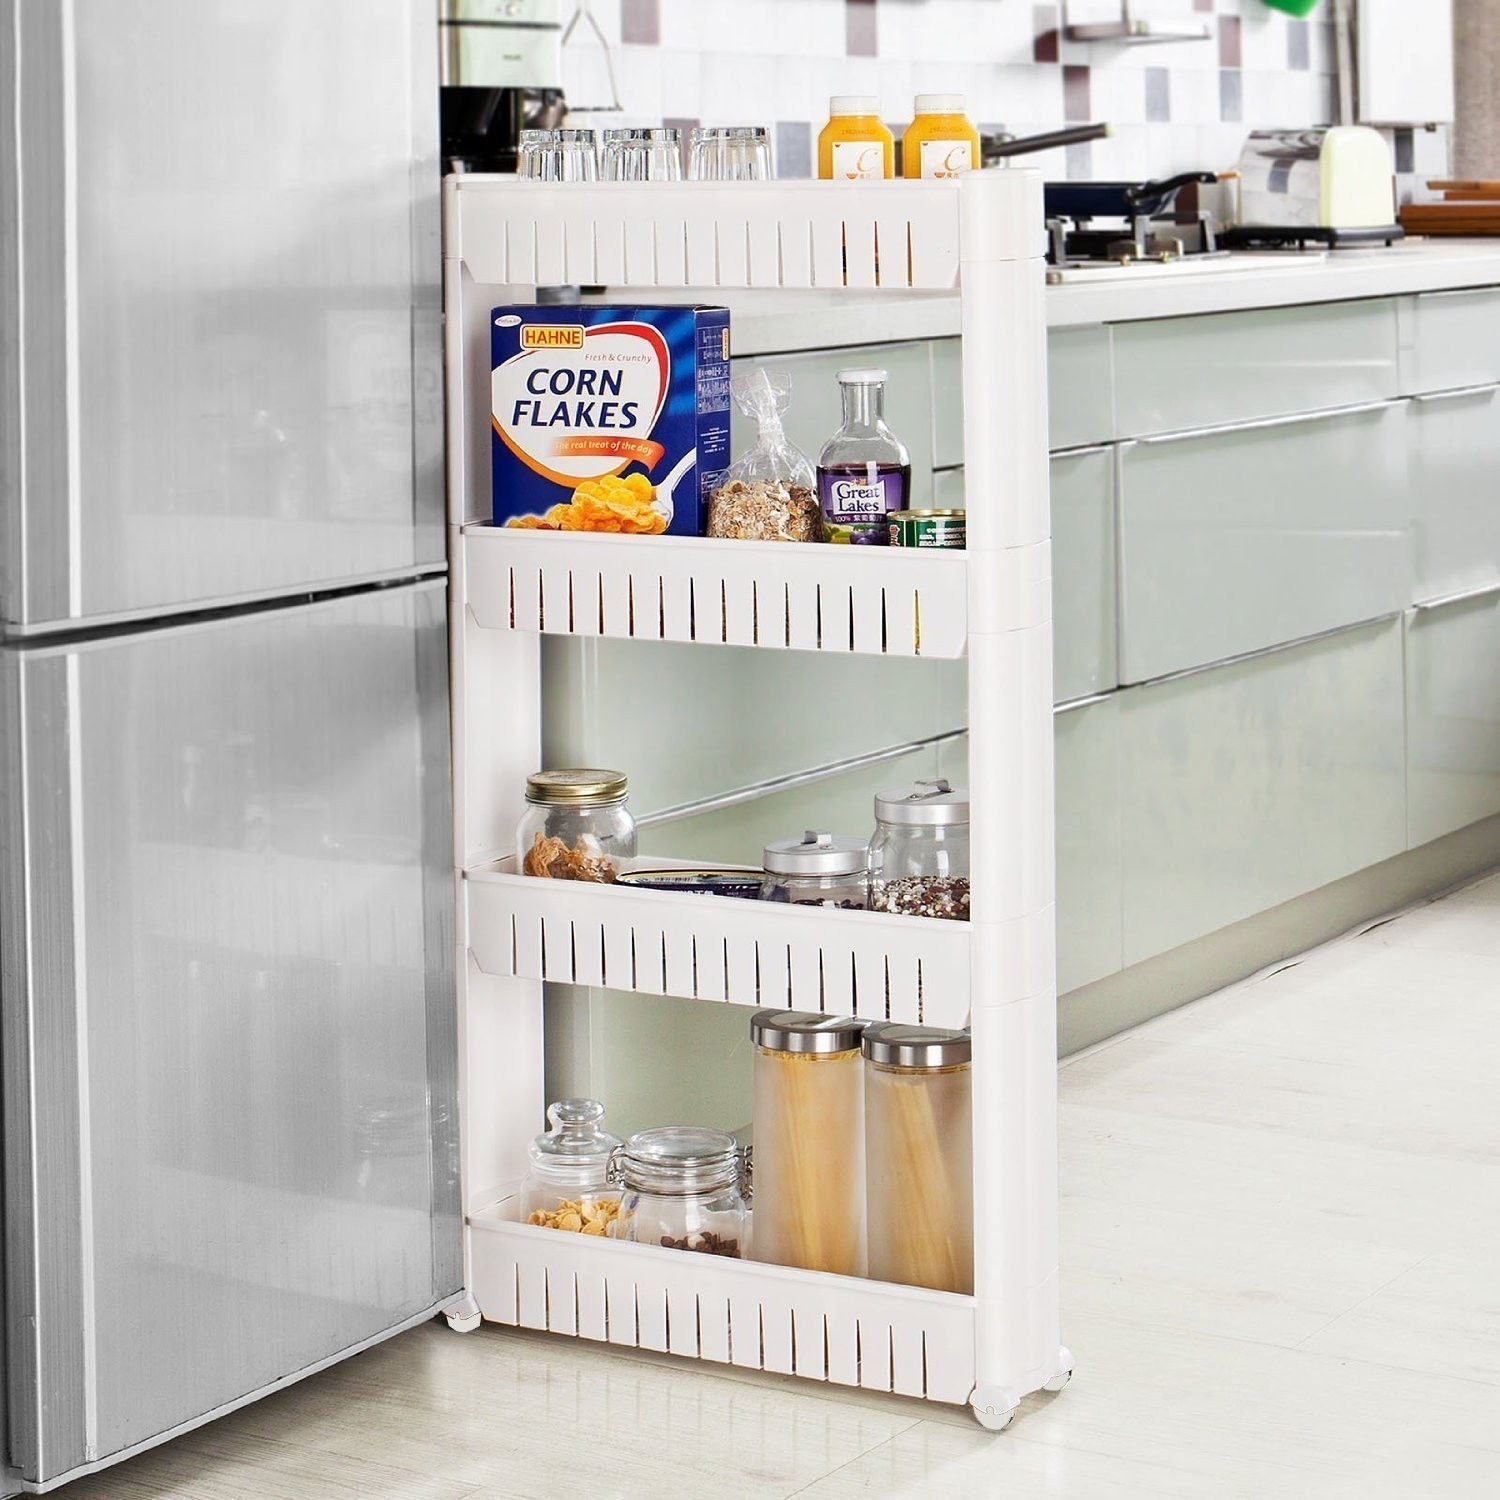 A rack being wheeled into a kitchen space